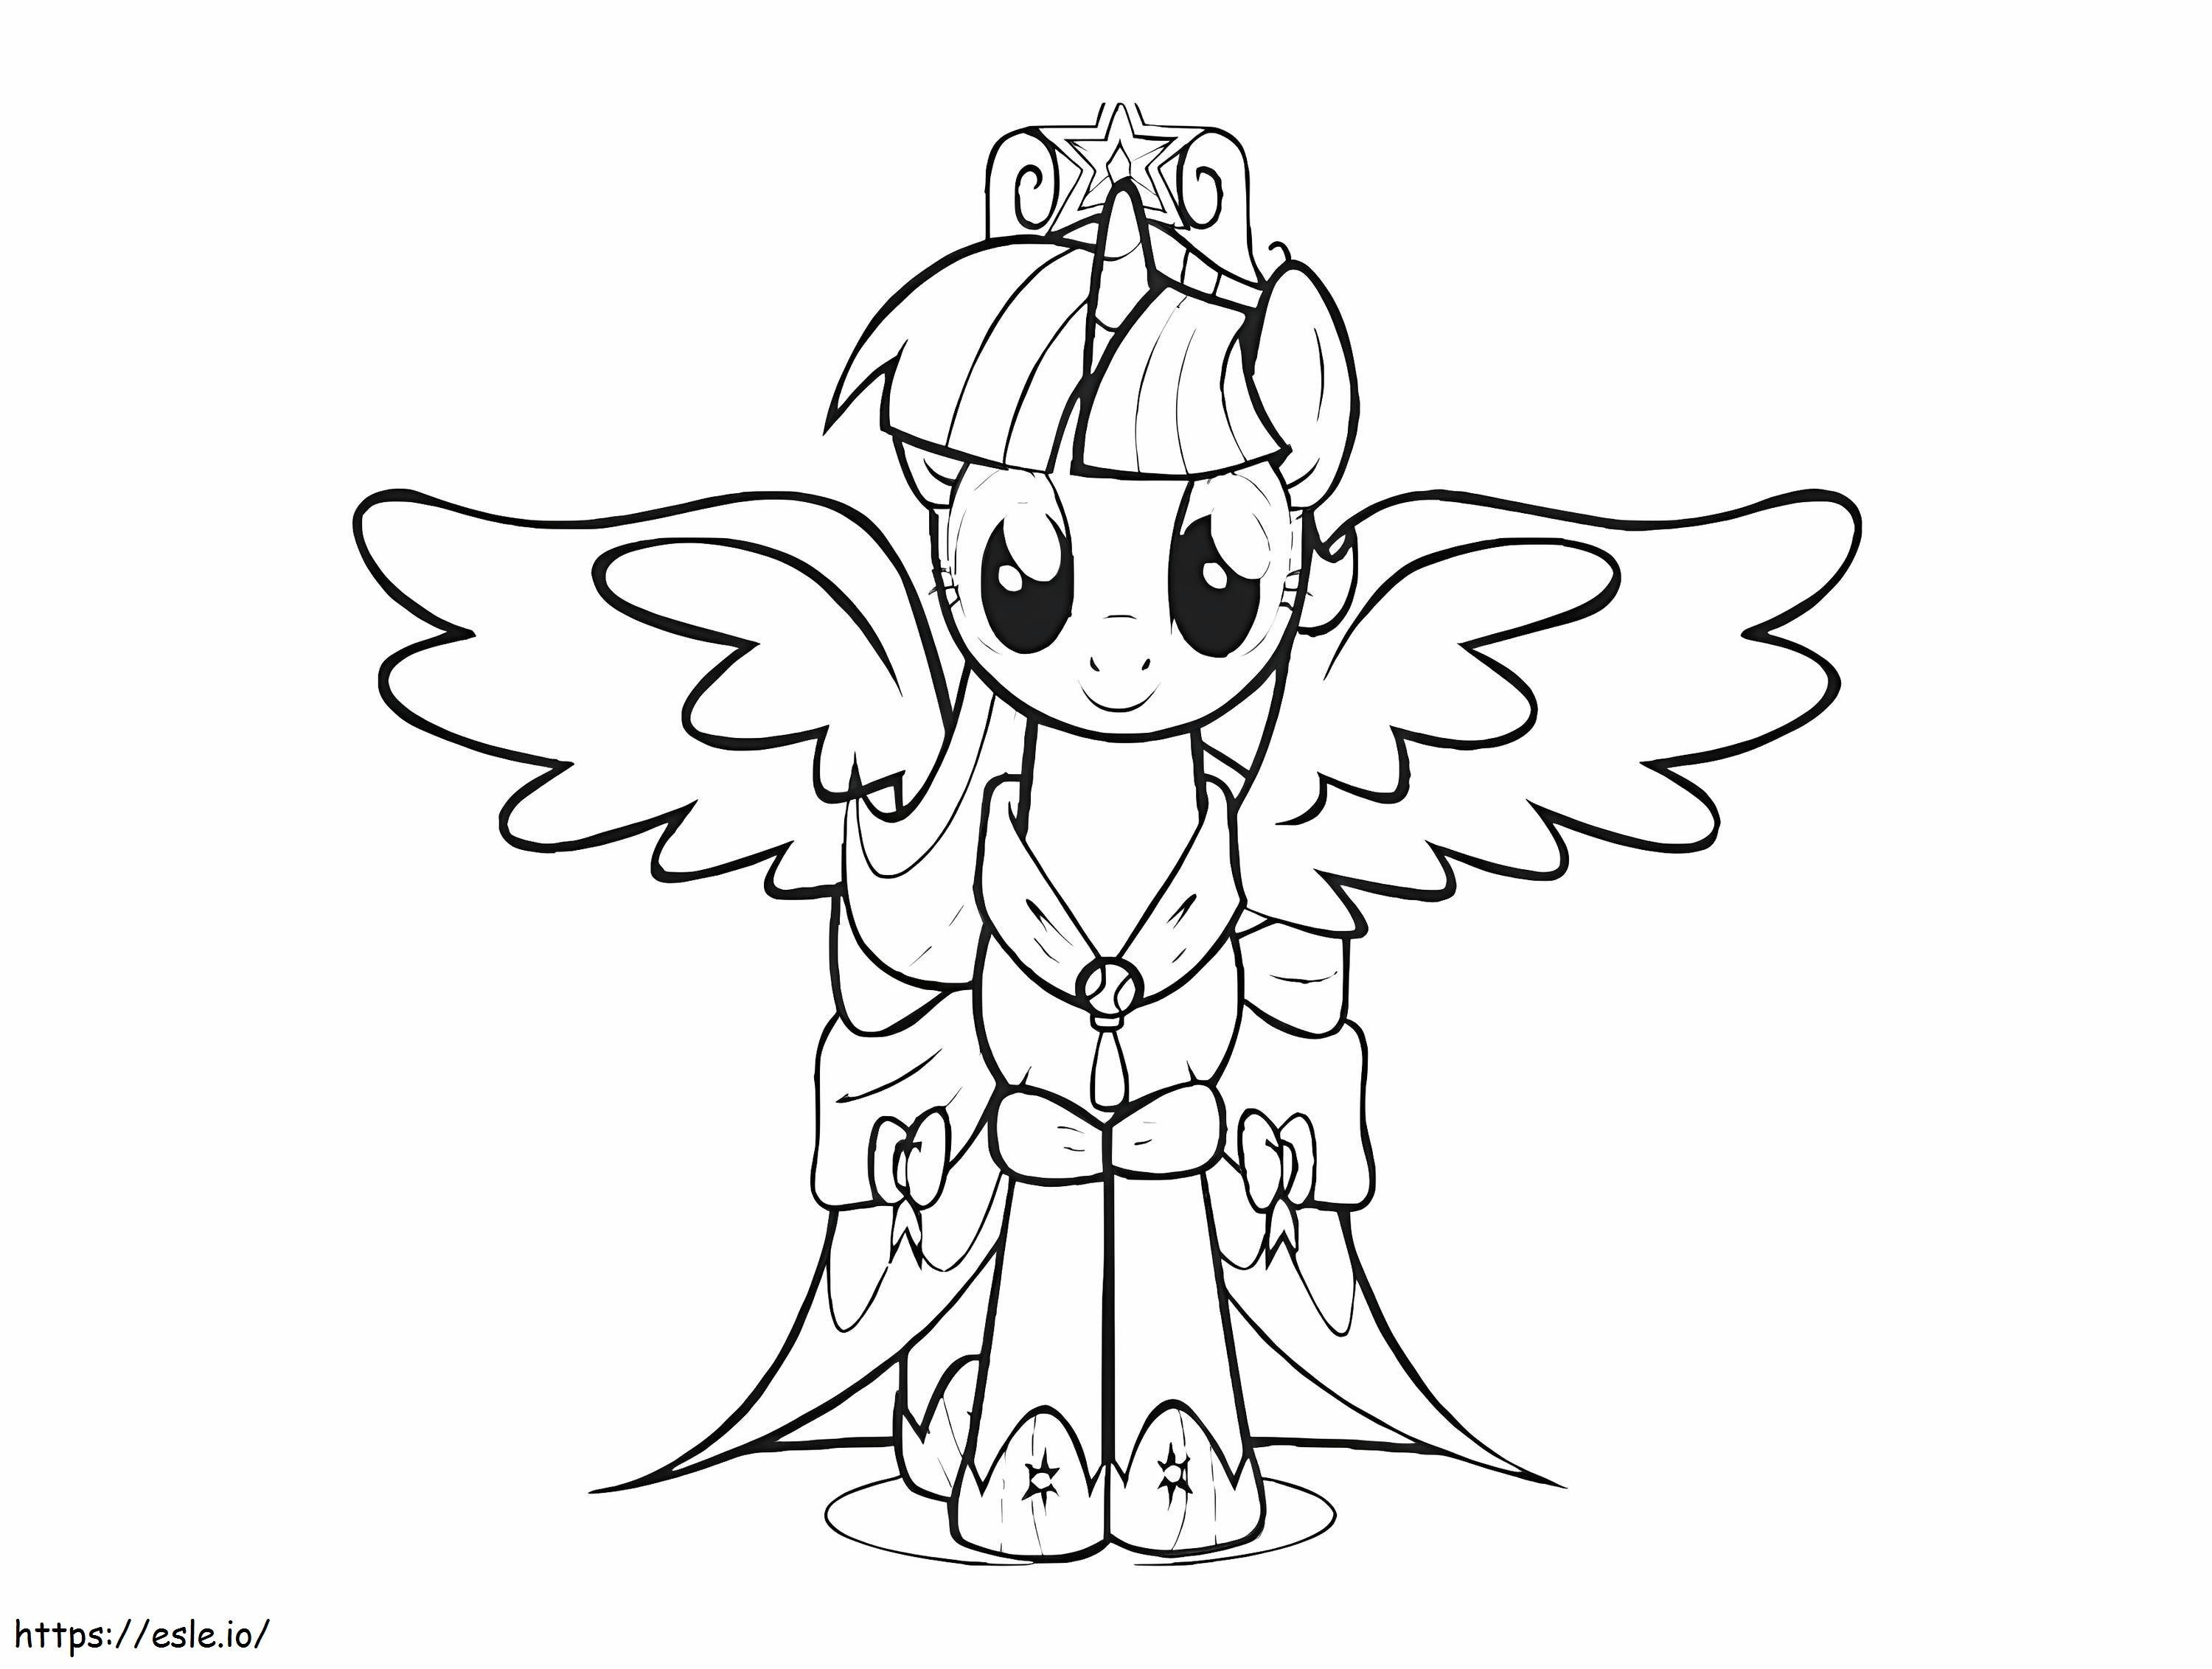 Little Pony coloring page